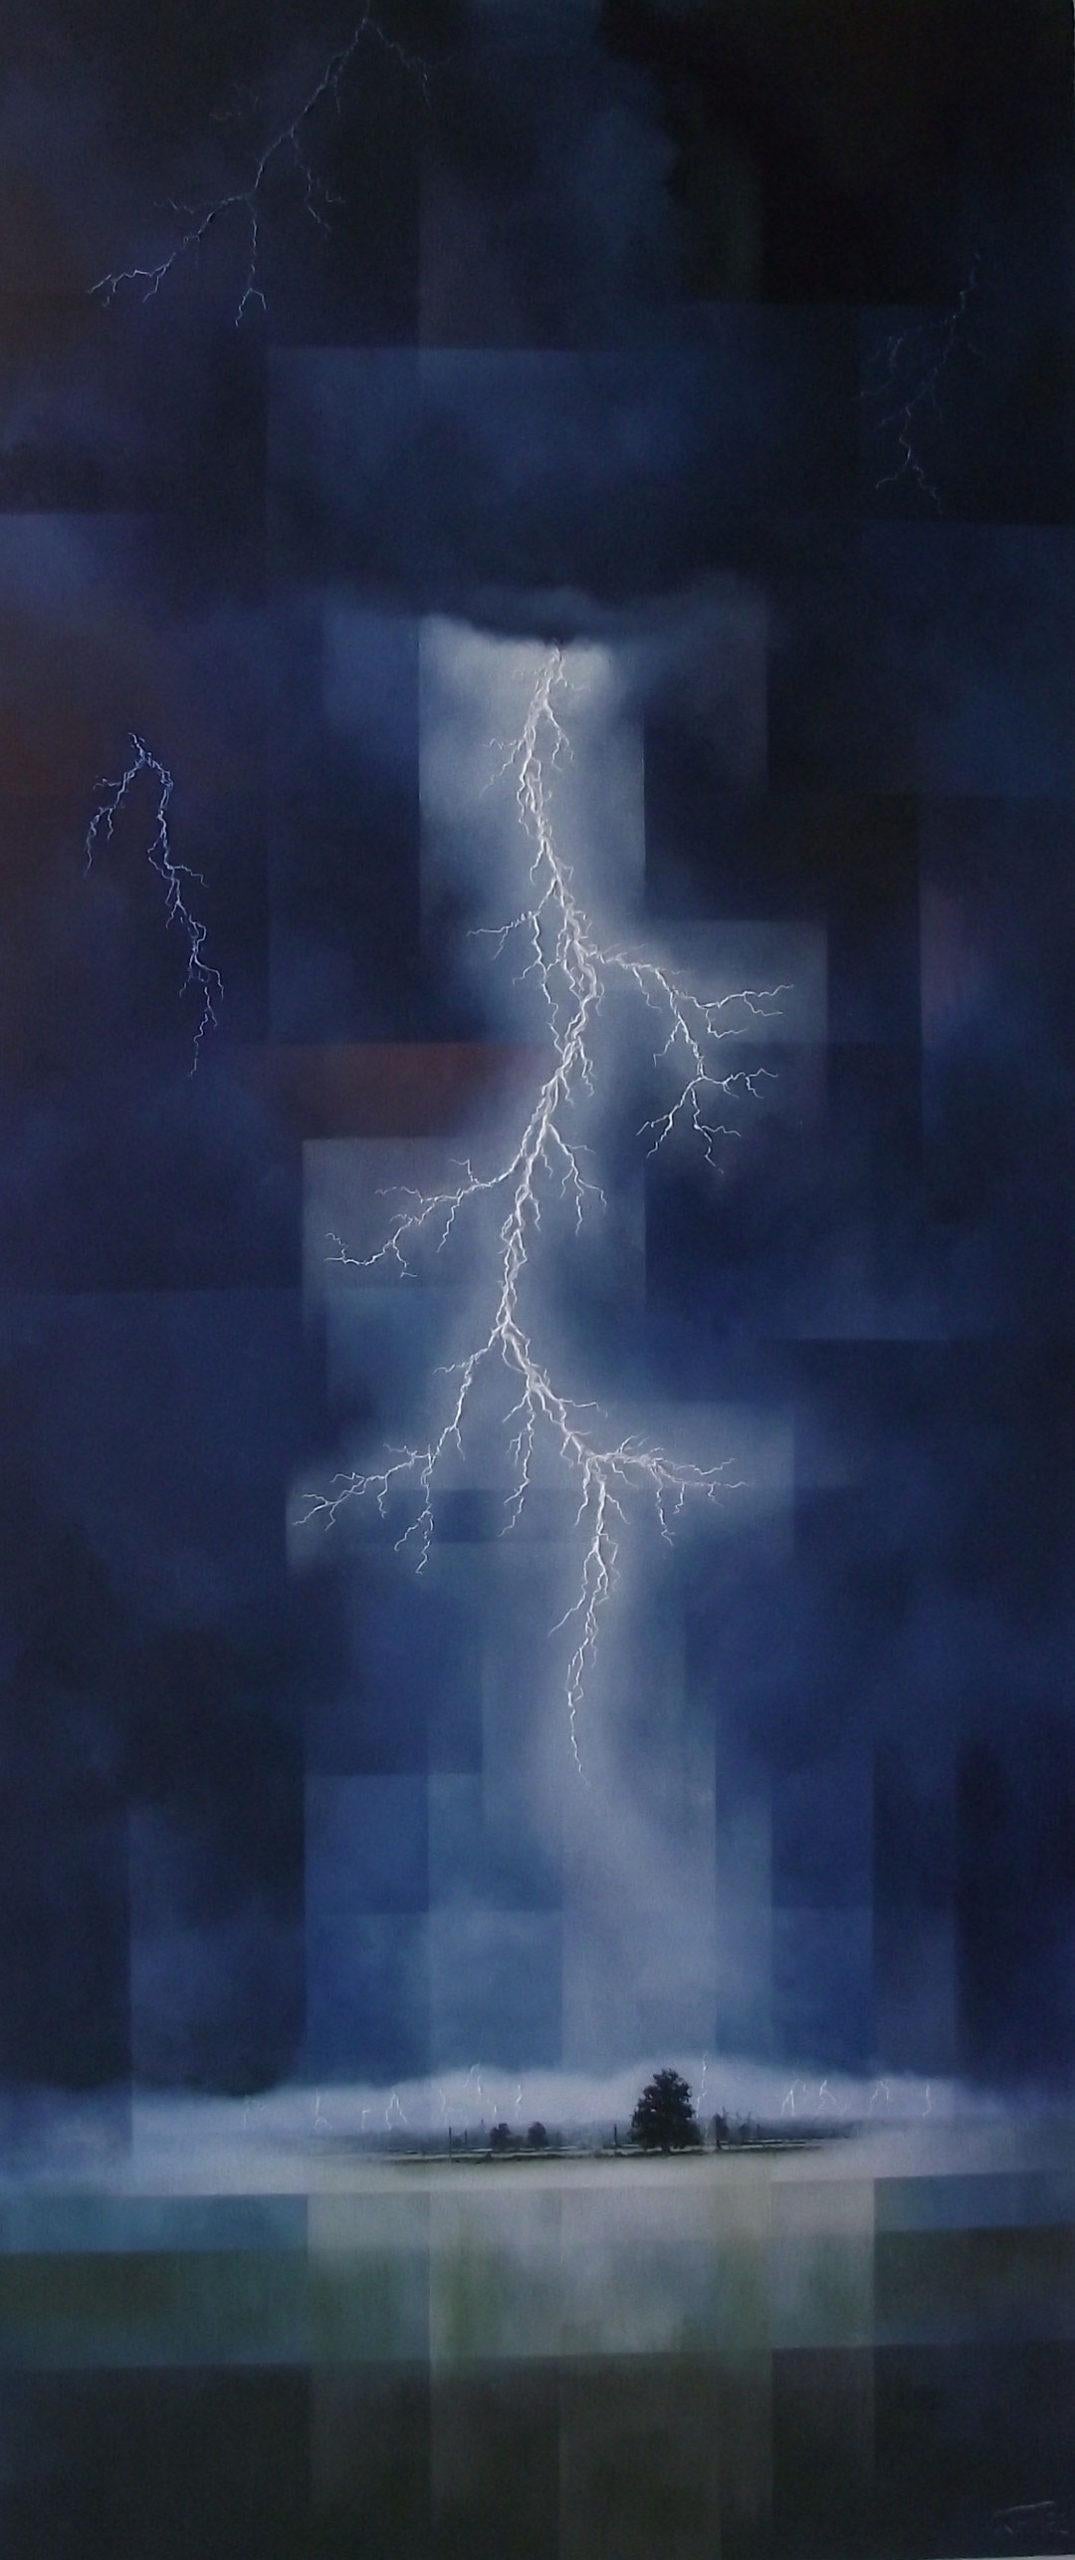 Glynne James Figurative Painting - Ready or Not - Lightening Strike / Contemporary Rural Landscape: Oil on Canvas